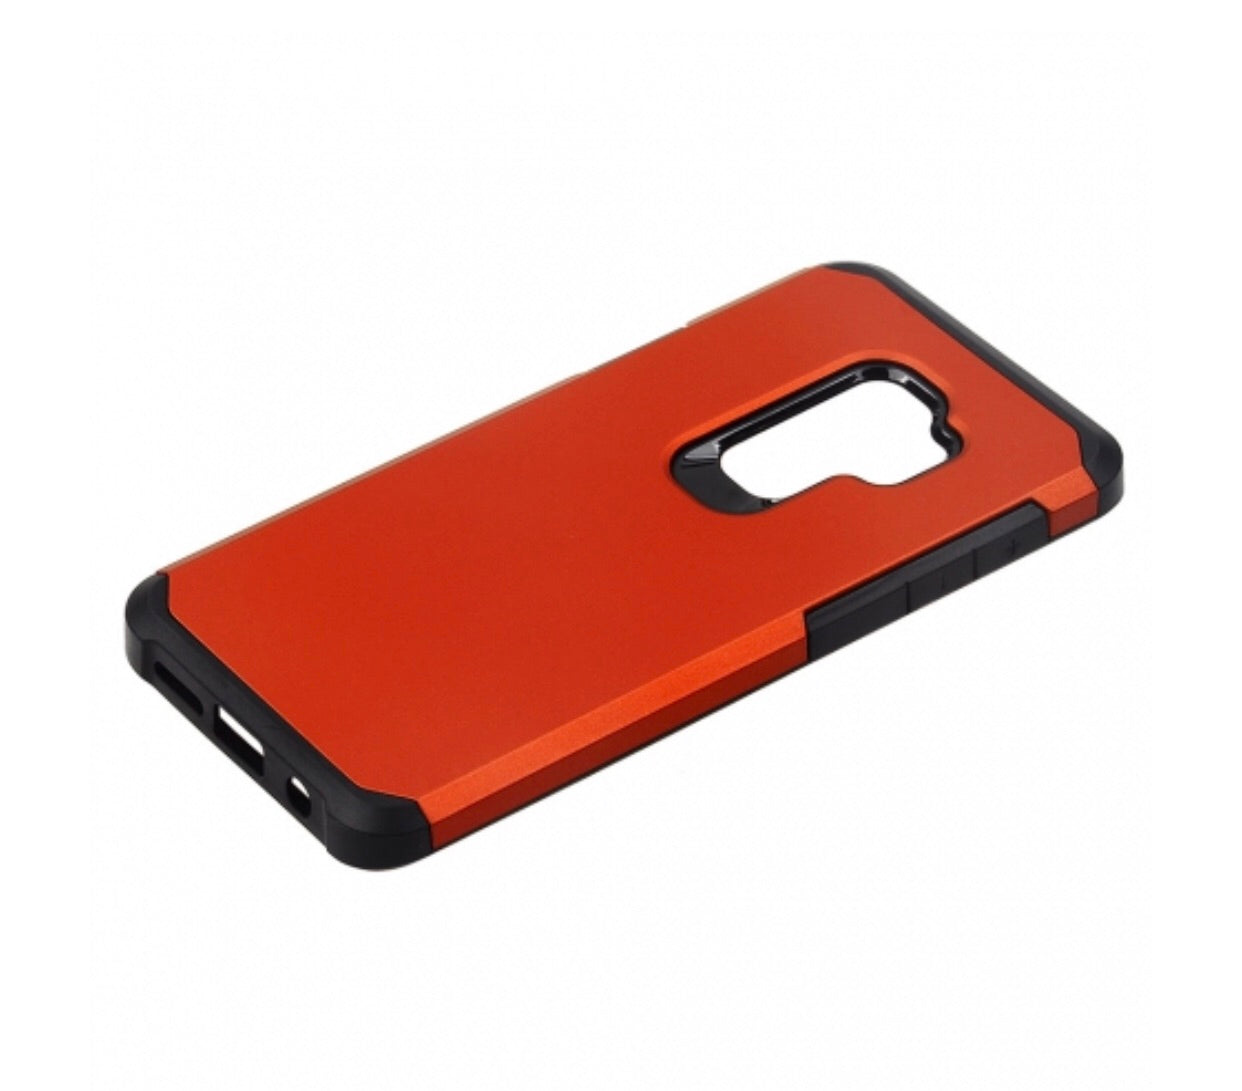 Samsung Galaxy S9 Plus - Solid Red Honey Leather Back Case